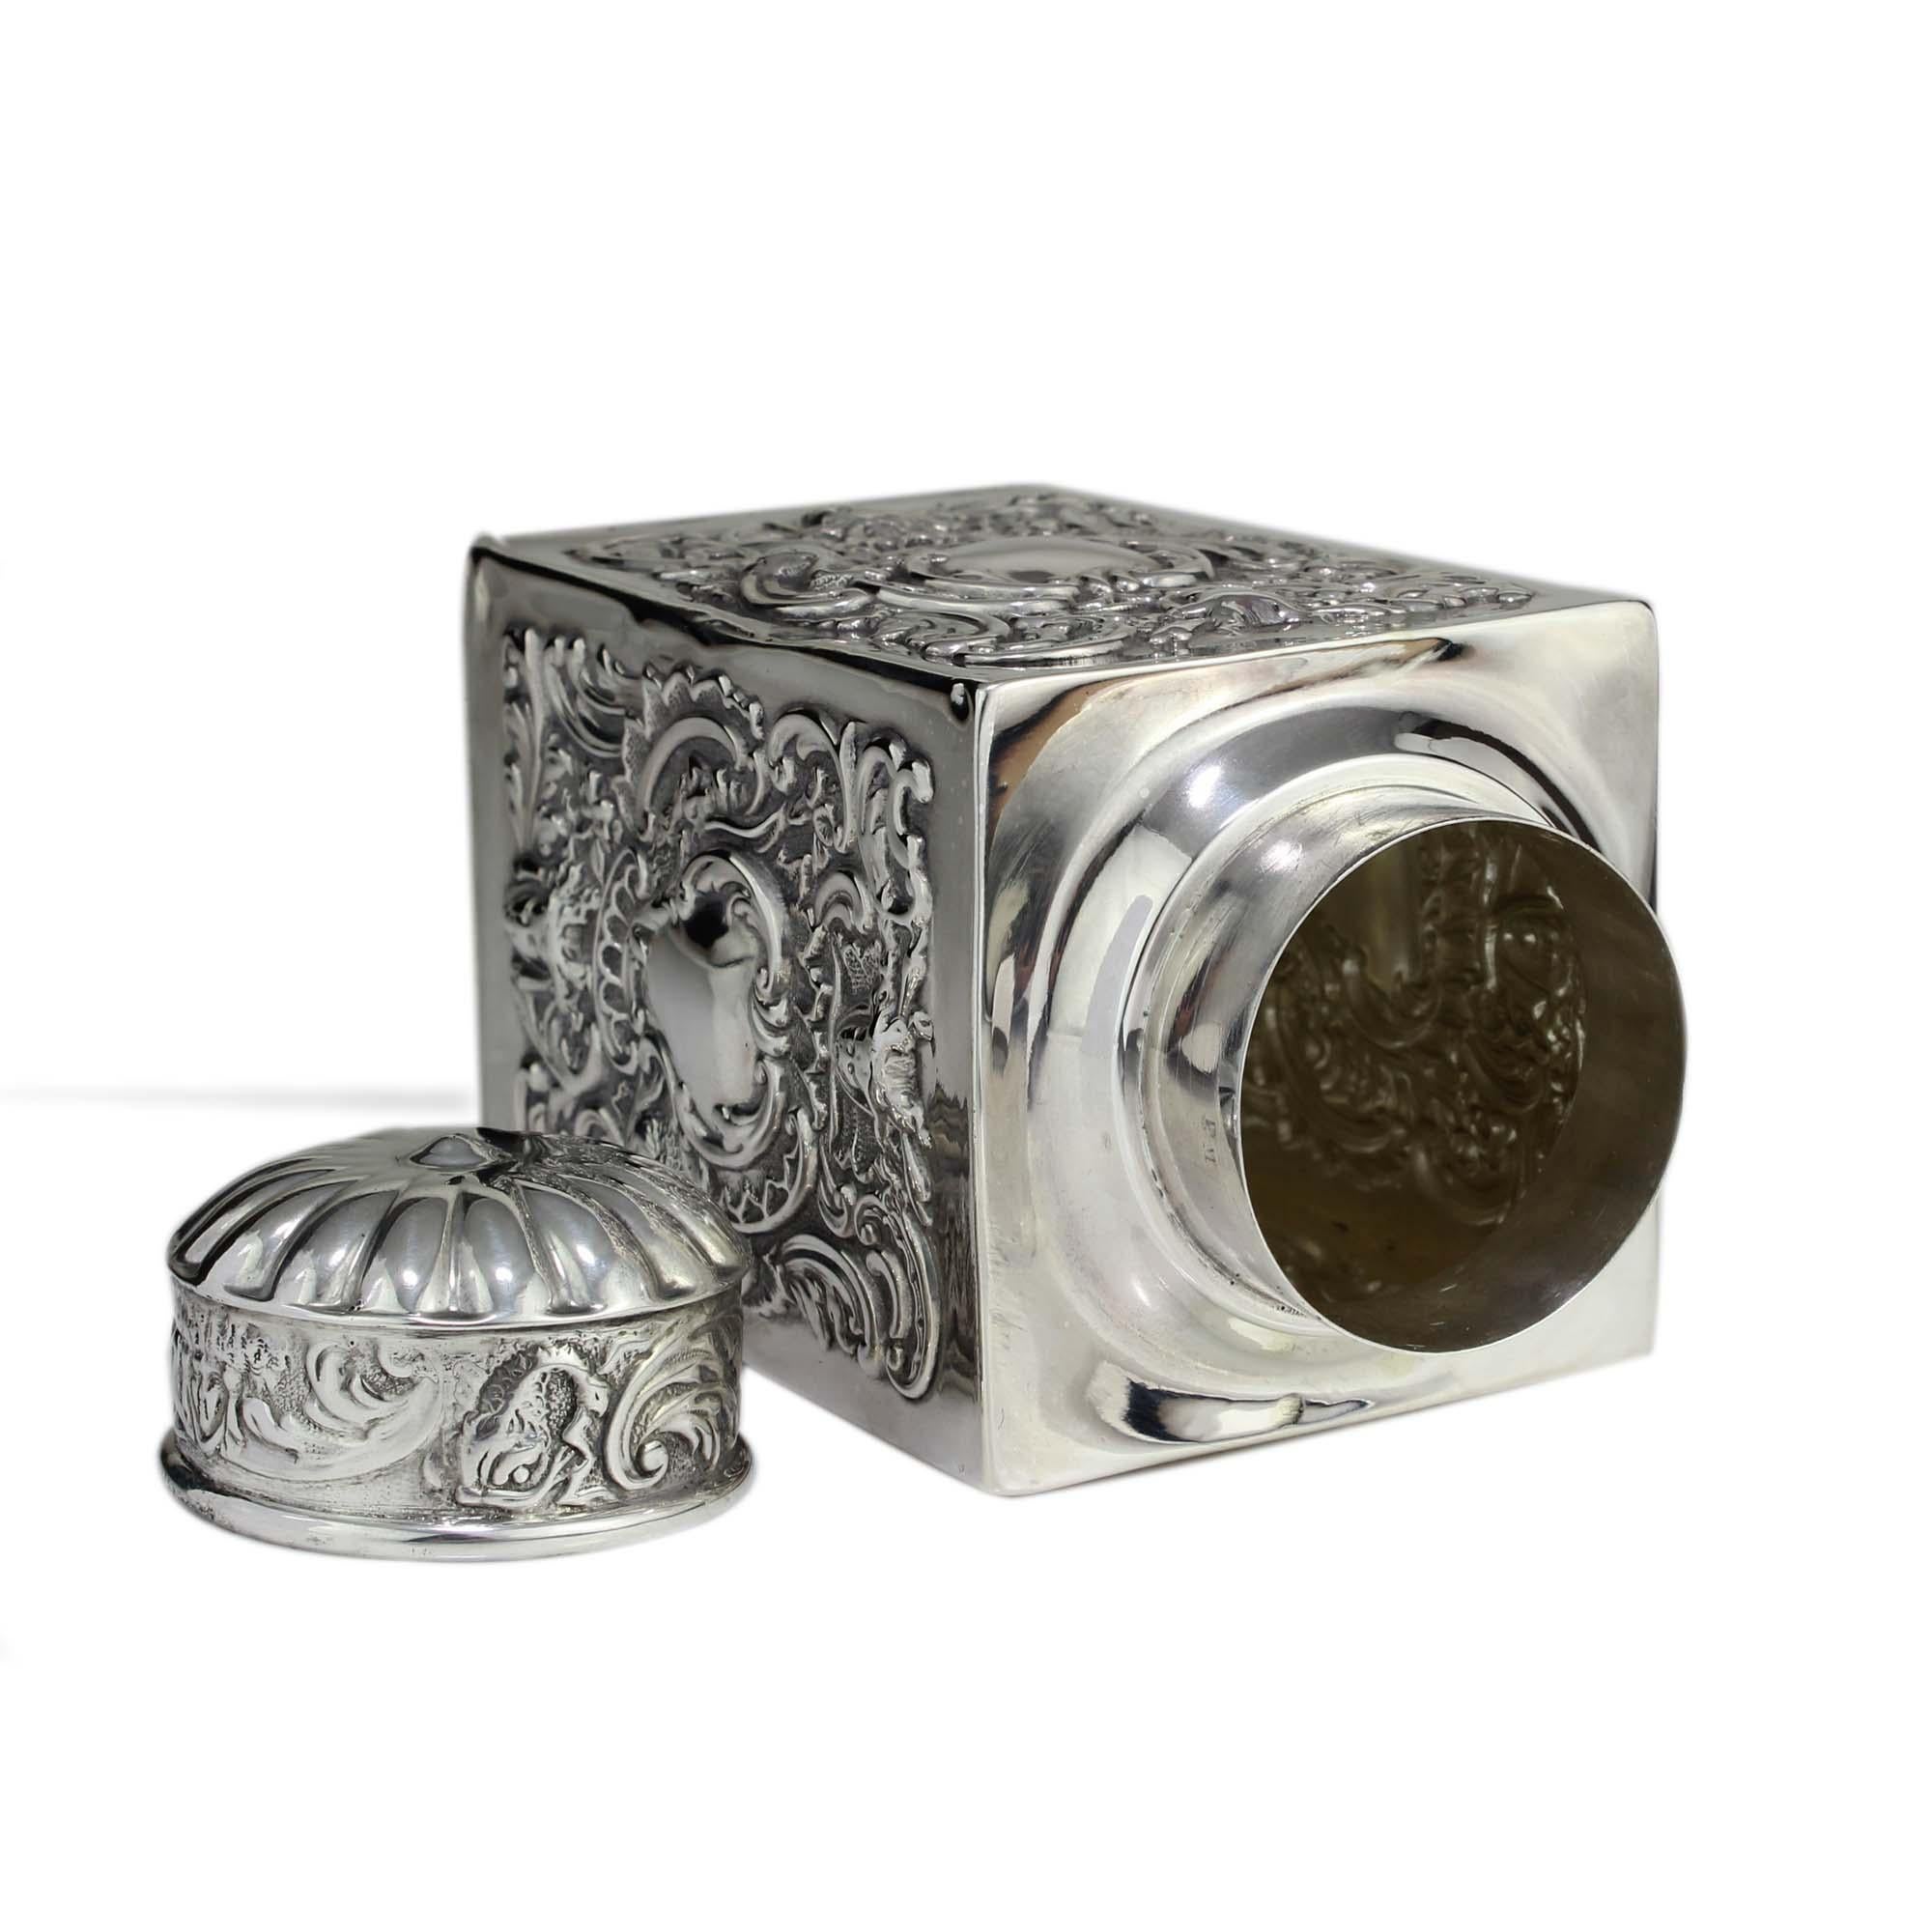 Antique Victorian Sterling Silver Embossed Tea Caddy In Good Condition For Sale In Braintree, GB